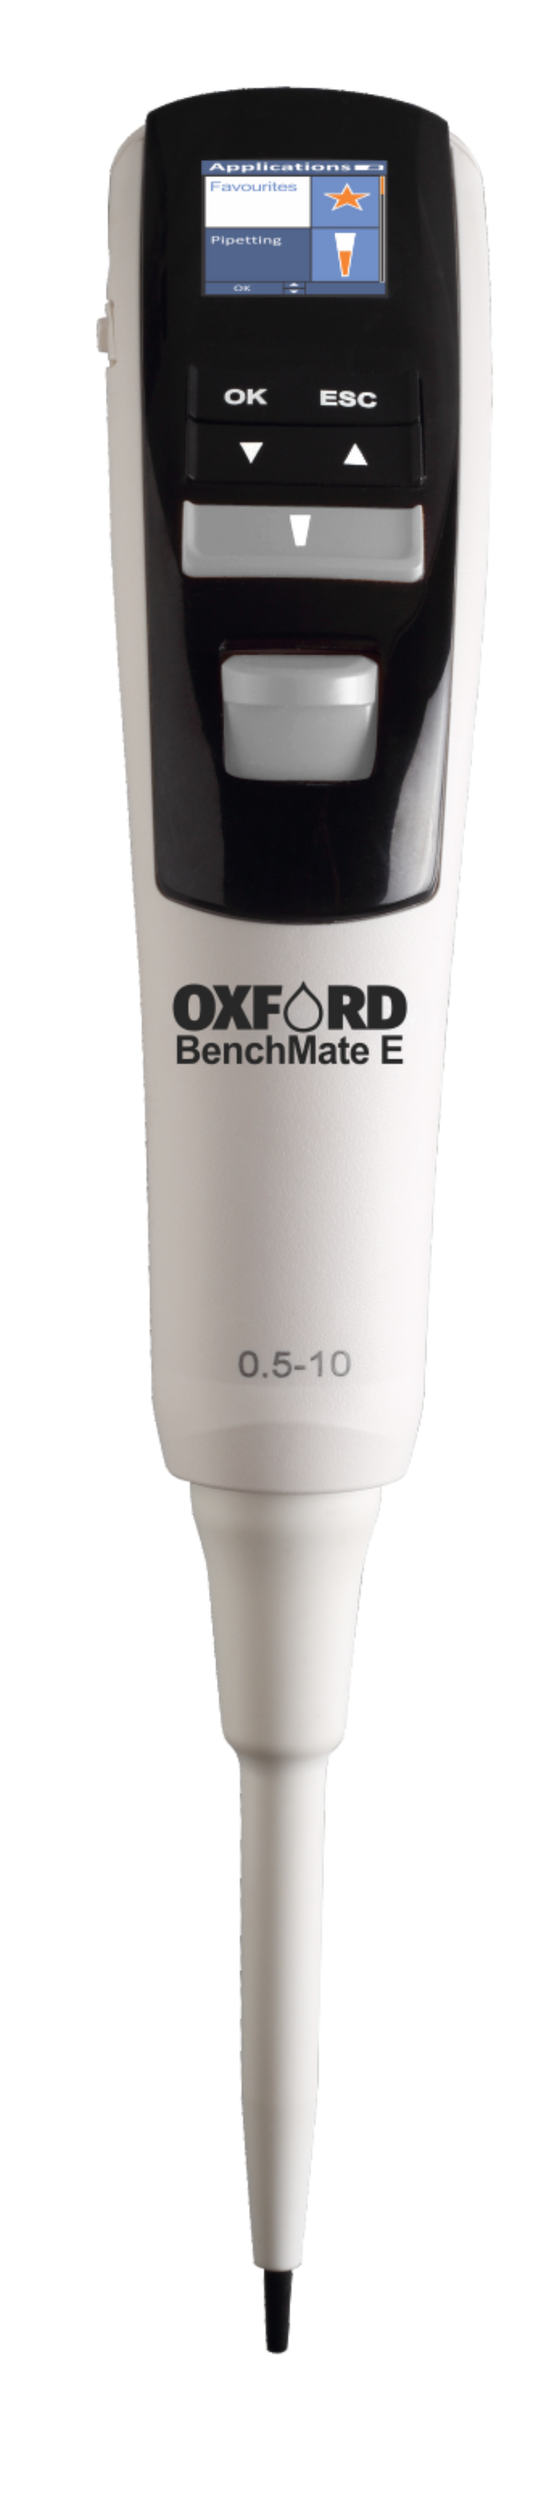 Oxford BenchMate Electronic Pipette 10-200 µl